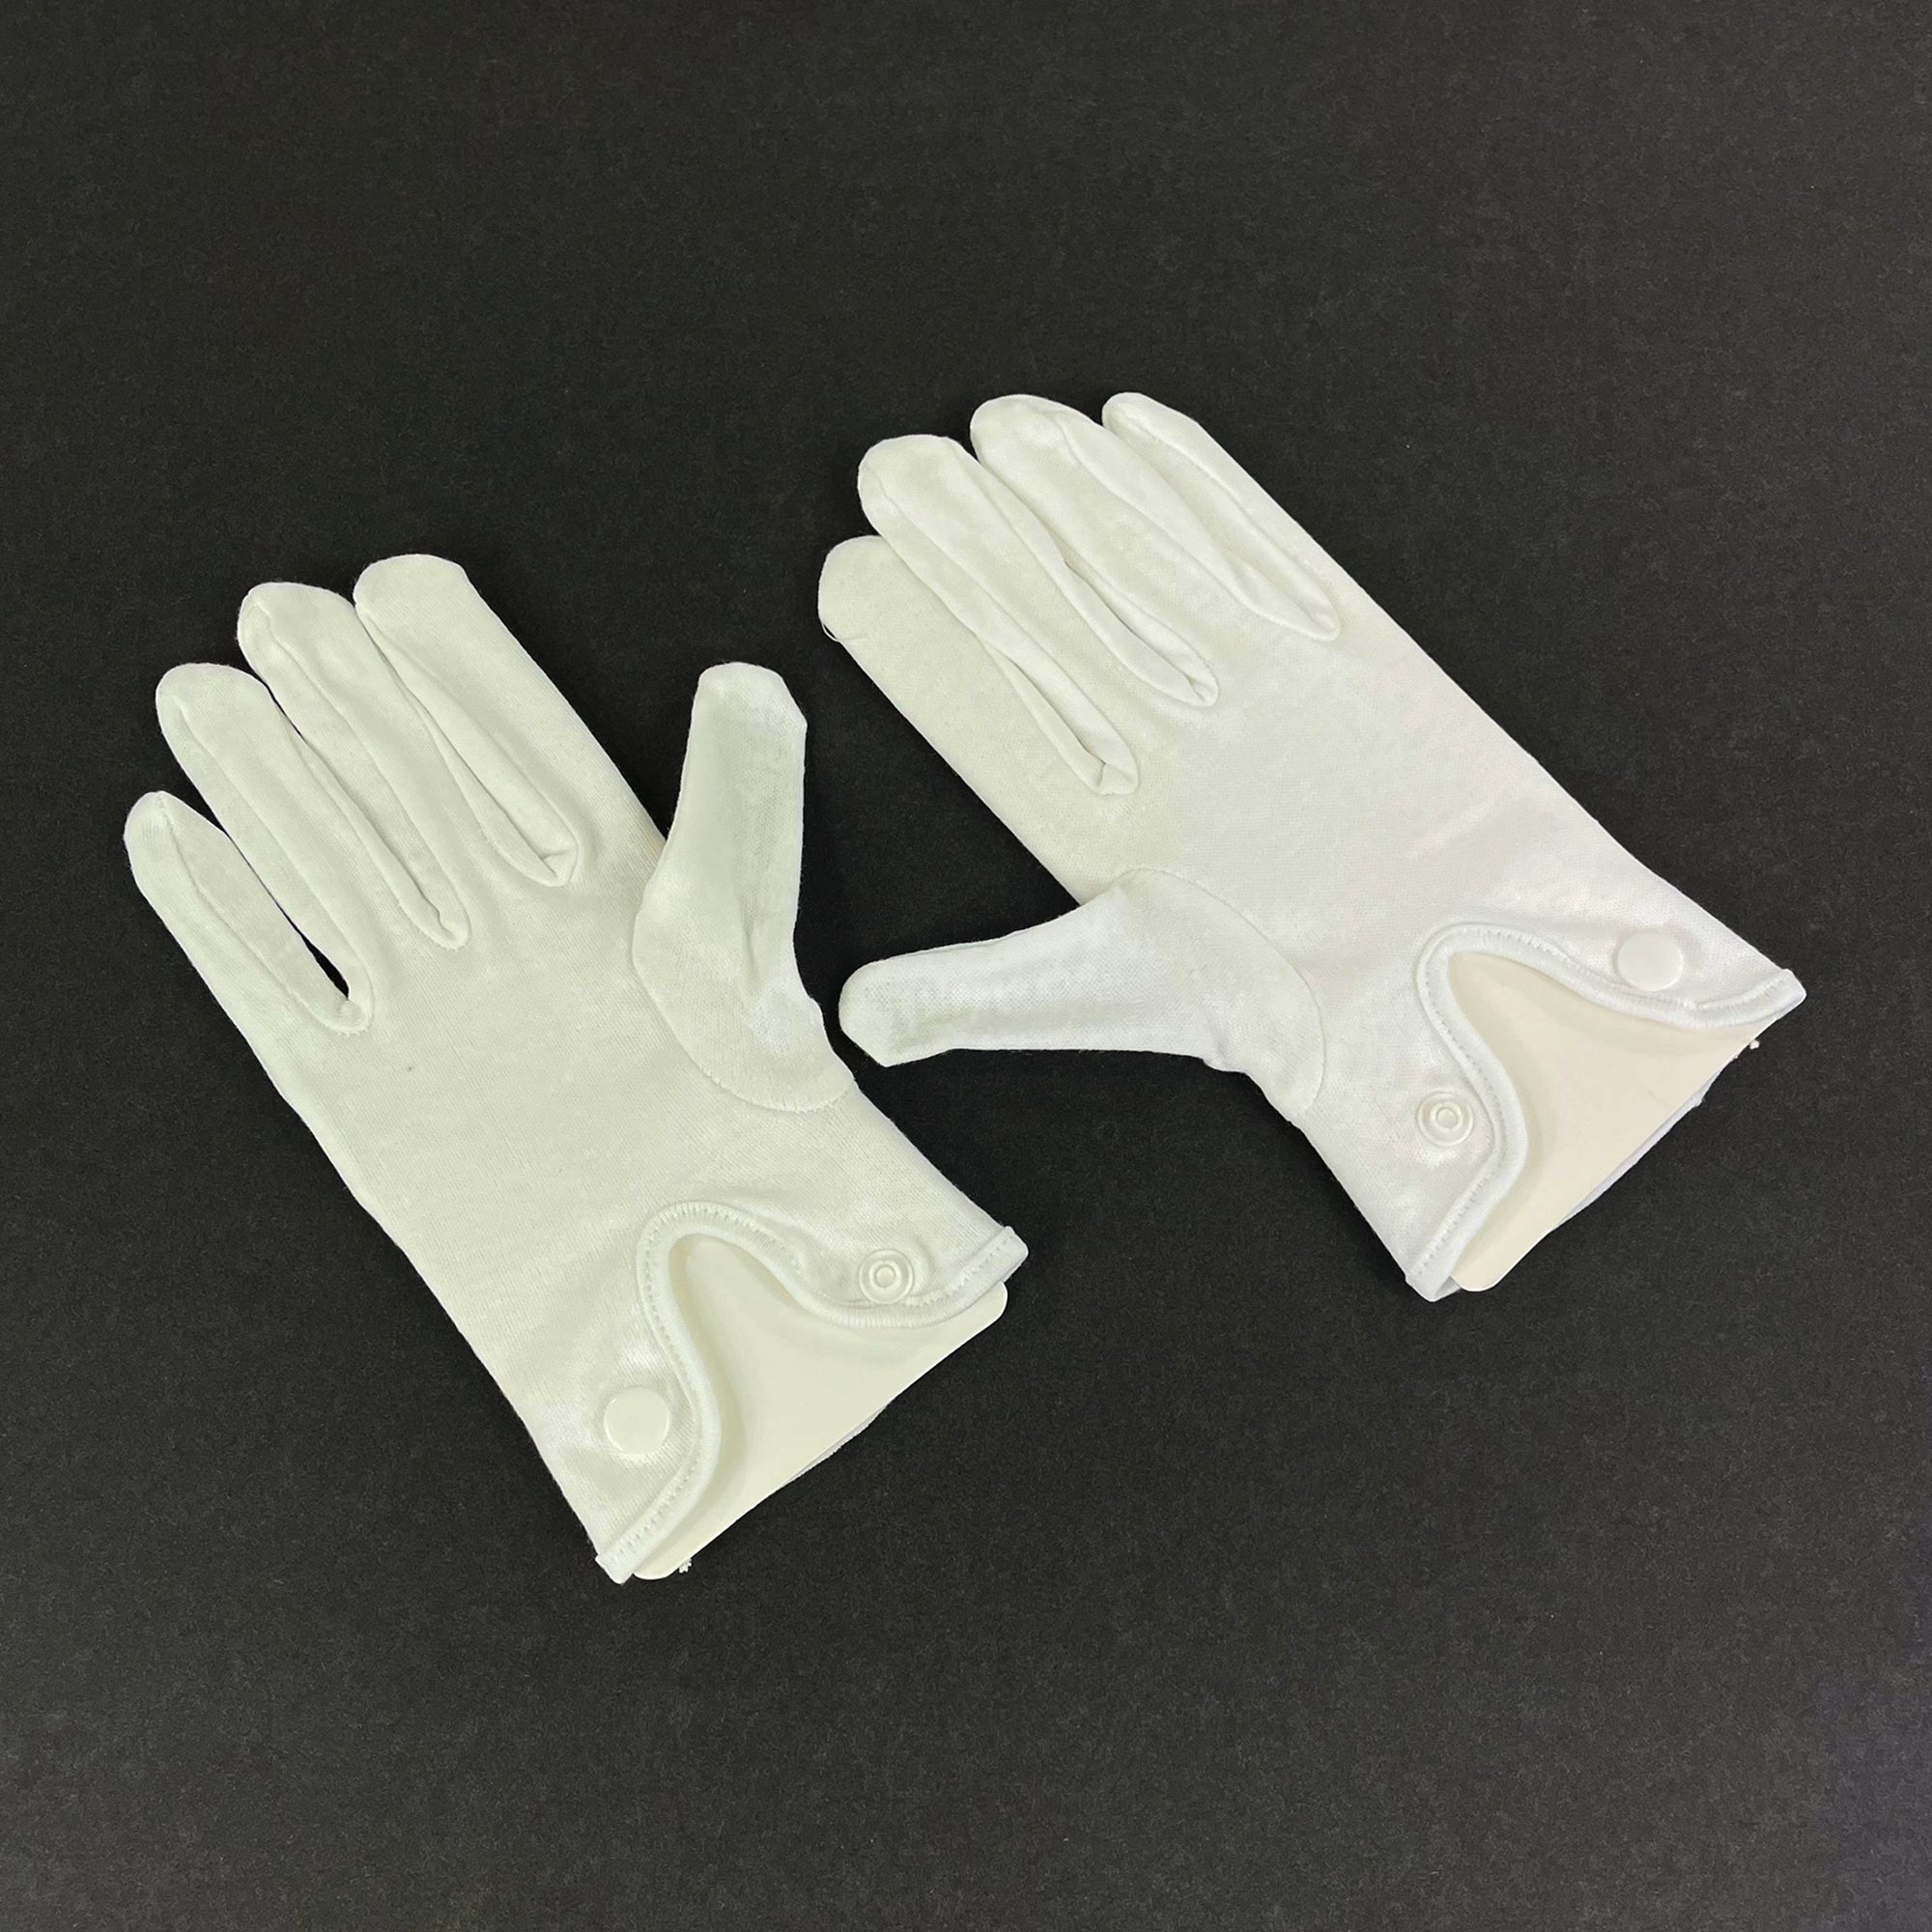 WEDDING AND COTTON GLOVES 855 (12PC)